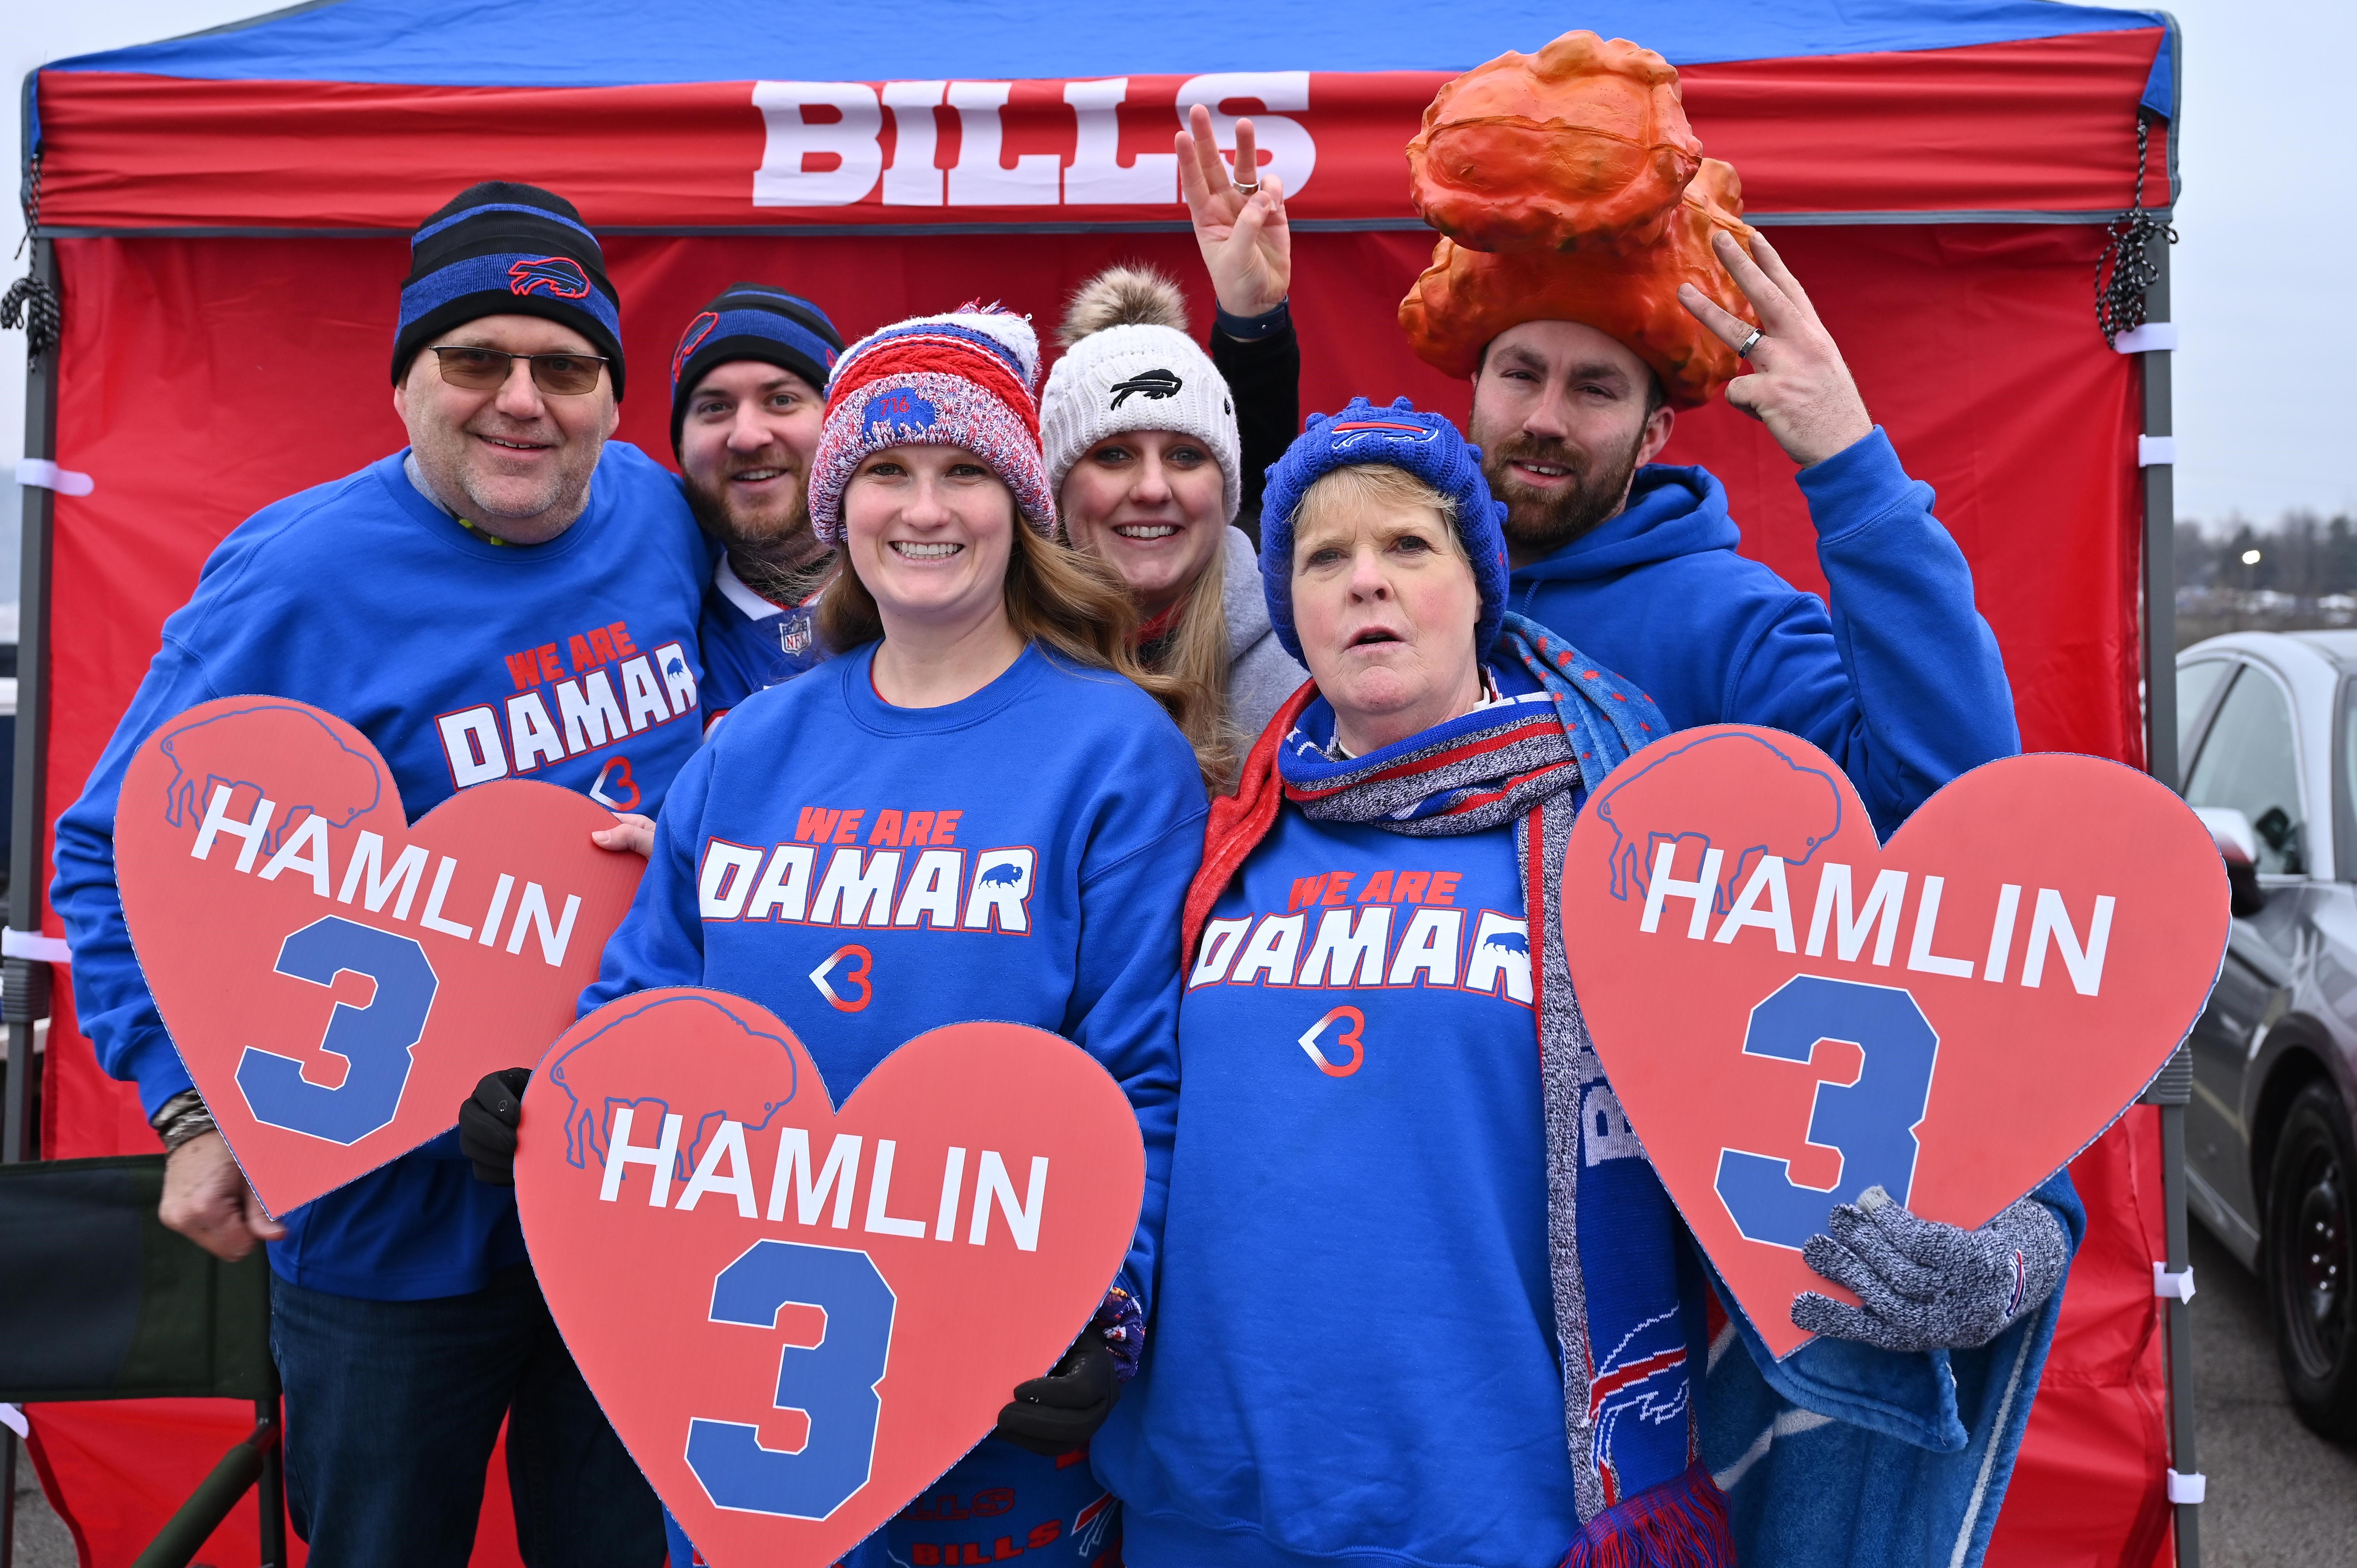 NFL players, fans pay tribute to Bills safety Damar Hamlin 